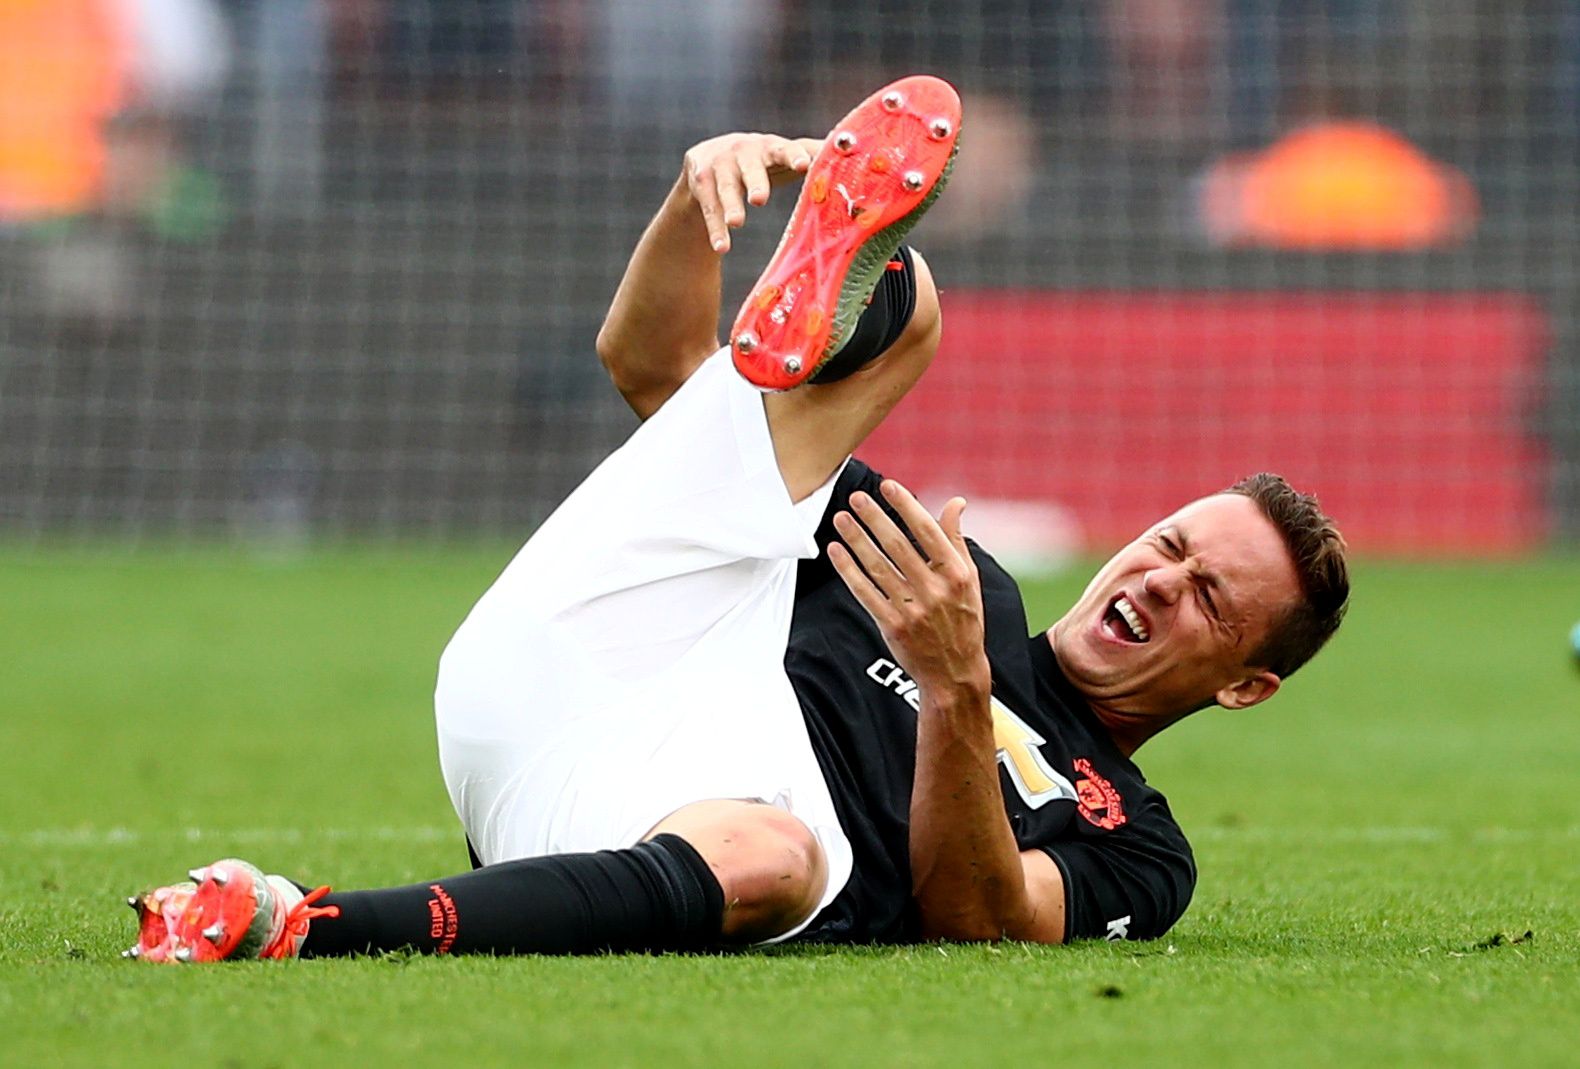 Soccer Football - Premier League - Southampton v Manchester United - St Mary's Stadium, Southampton, Britain - August 31, 2019  Manchester United's Nemanja Matic reacts after sustaining an injury   REUTERS/Hannah Mckay  EDITORIAL USE ONLY. No use with unauthorized audio, video, data, fixture lists, club/league logos or 